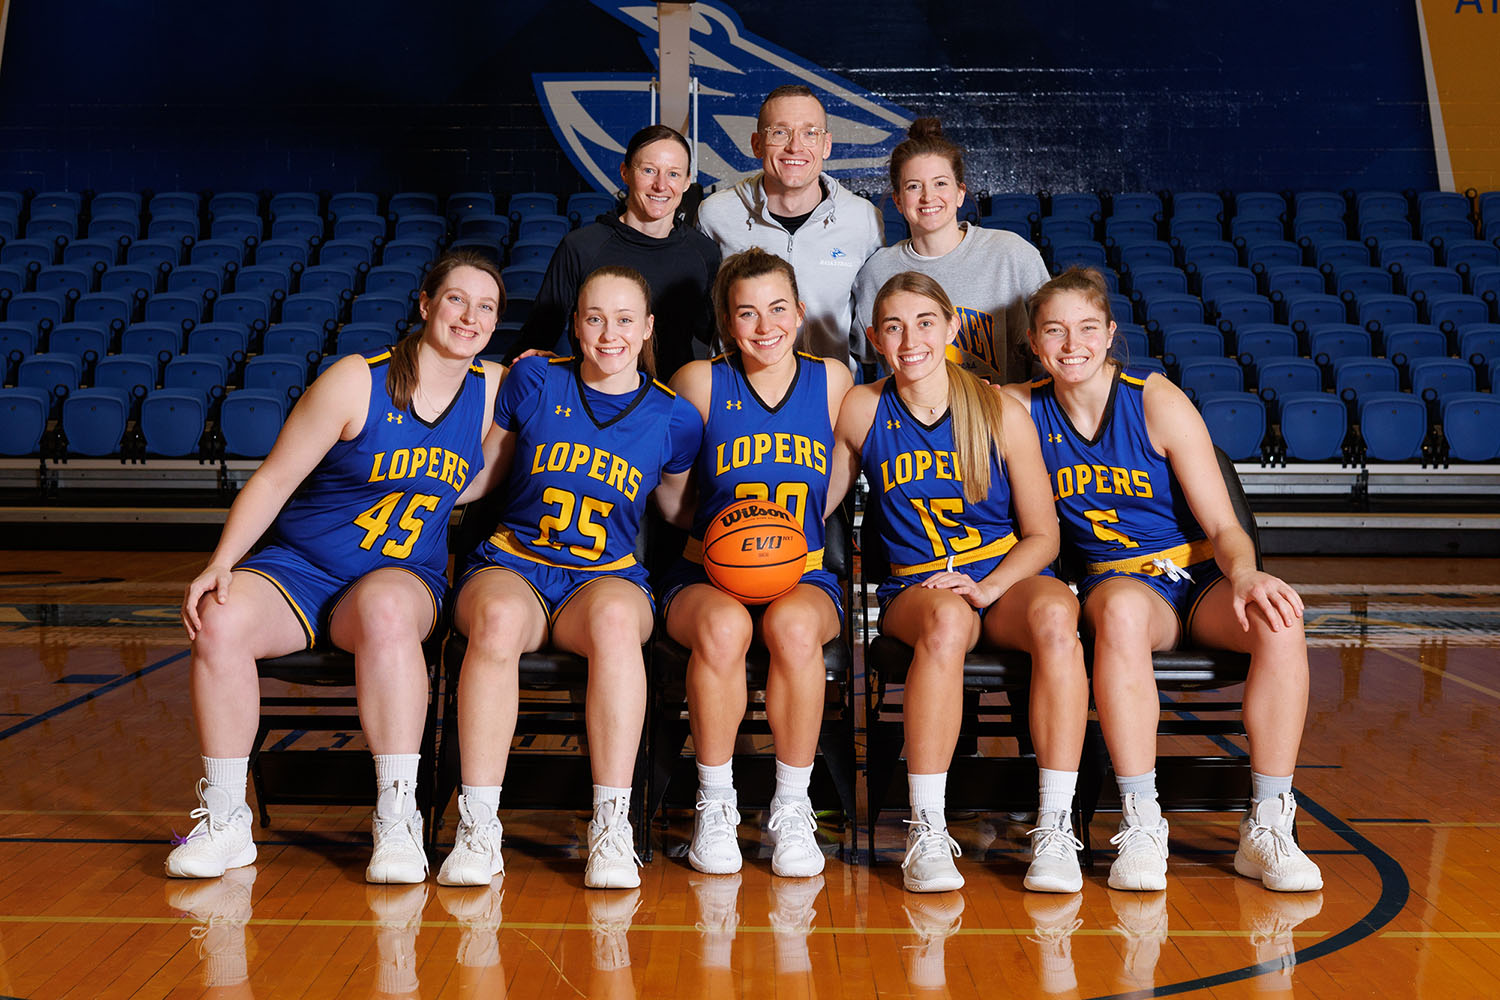 UNK women’s basketball players, front row from left, Brooke Carlson, Shiloh McCool, Klaire Kirsch, Maegan Holt and Elisa Backes are pictured with coaches, back row from left, Carrie Eighmey, Devin Eighmey and Bailey Morris.